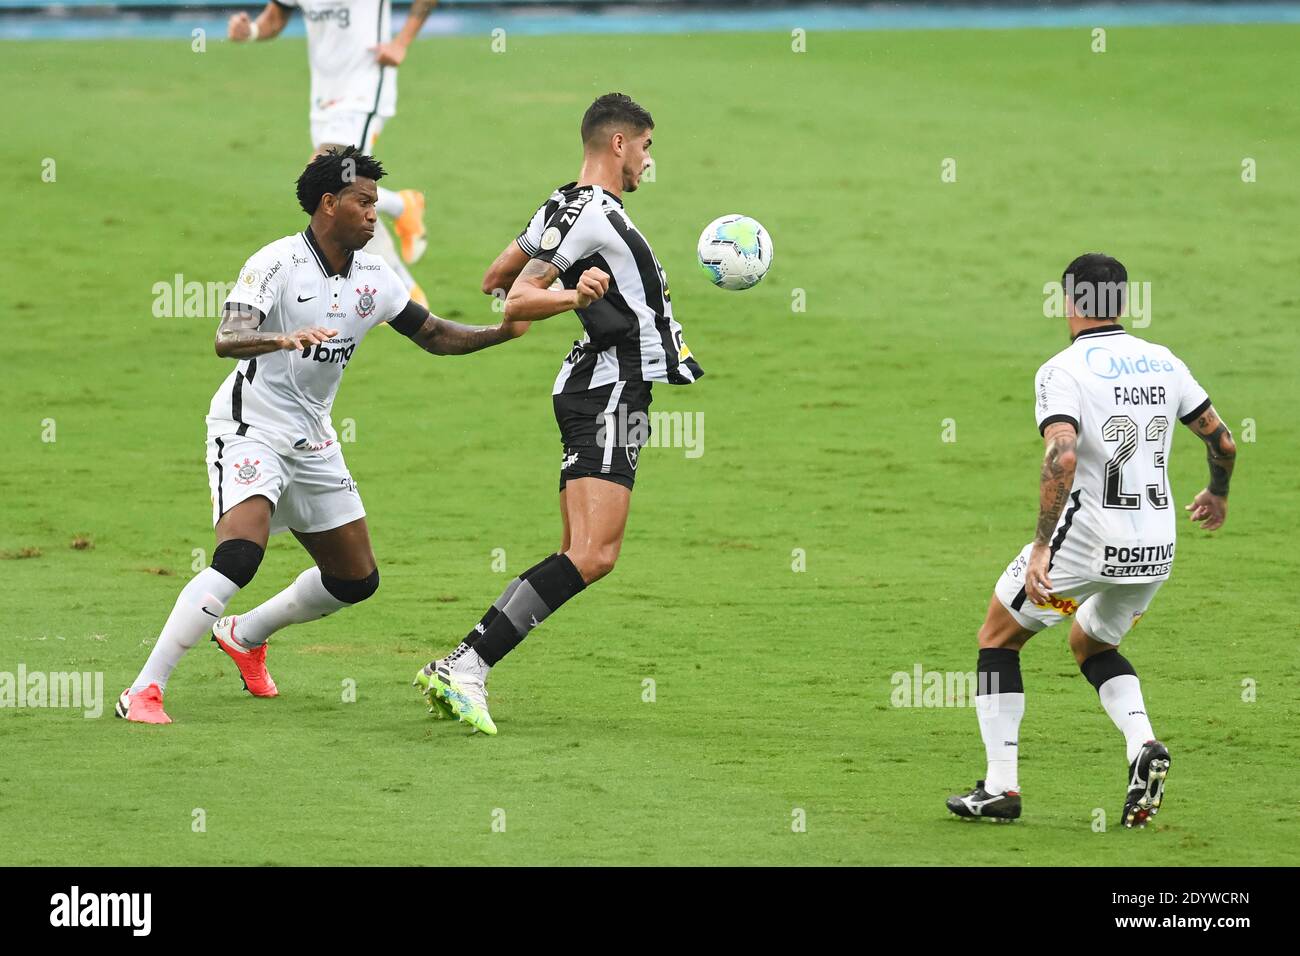 Rio, Brazil - december 27, 2020: Gil and Pedro Raul player in match between Botafogo and Corinthians by Brazilian Championship  in Nilton Santos Stadi Stock Photo